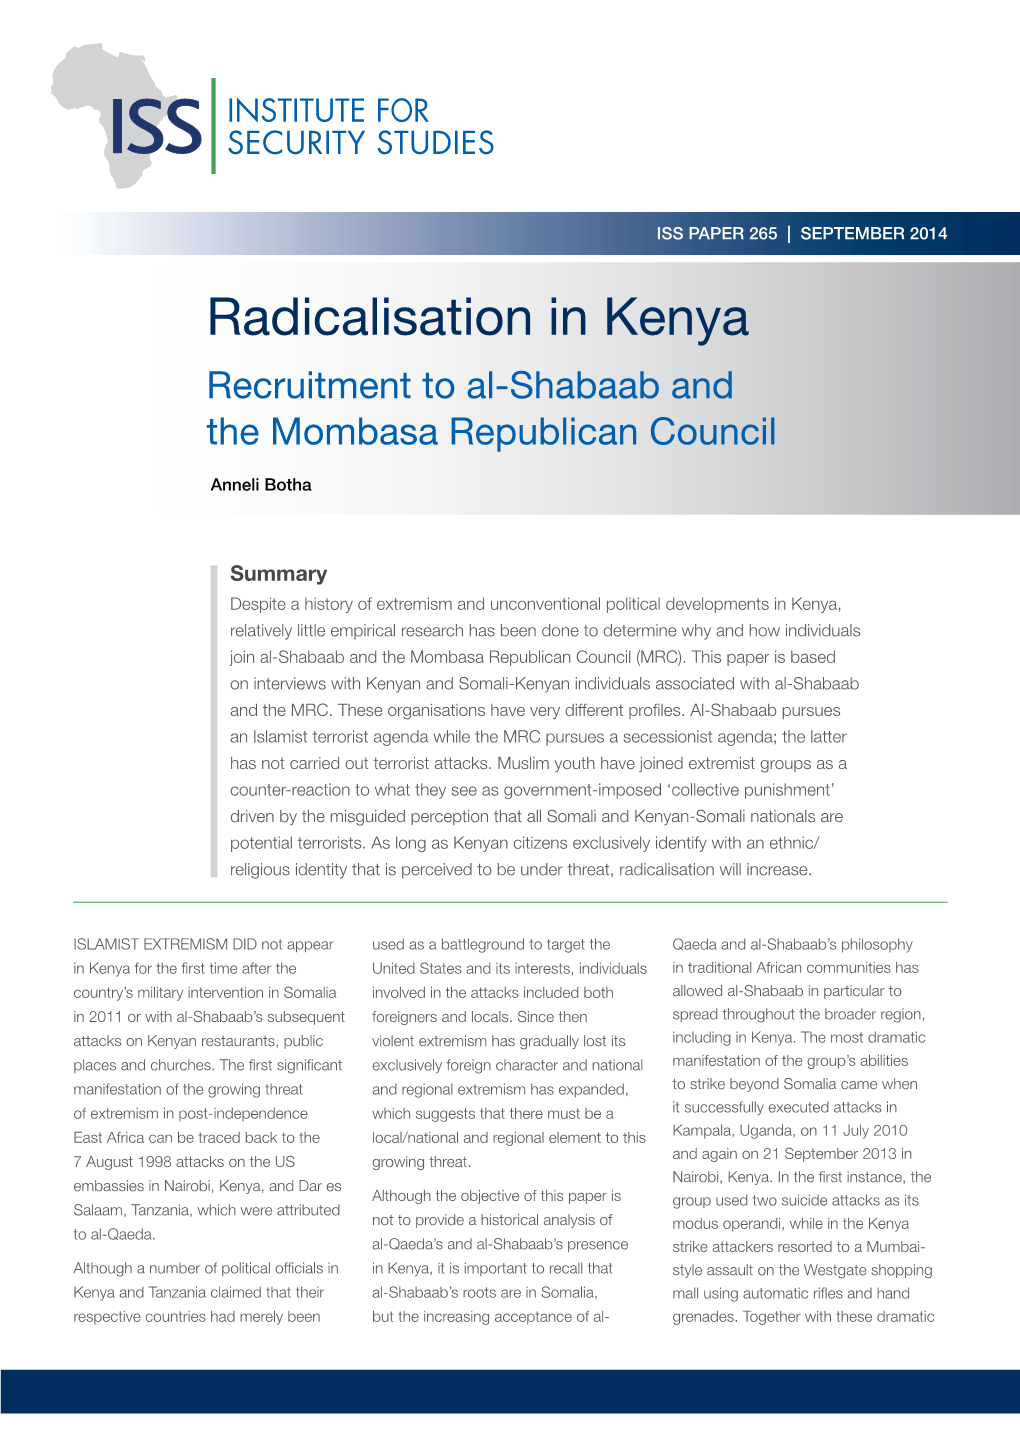 Radicalisation in Kenya Recruitment to Al-Shabaab and the Mombasa Republican Council